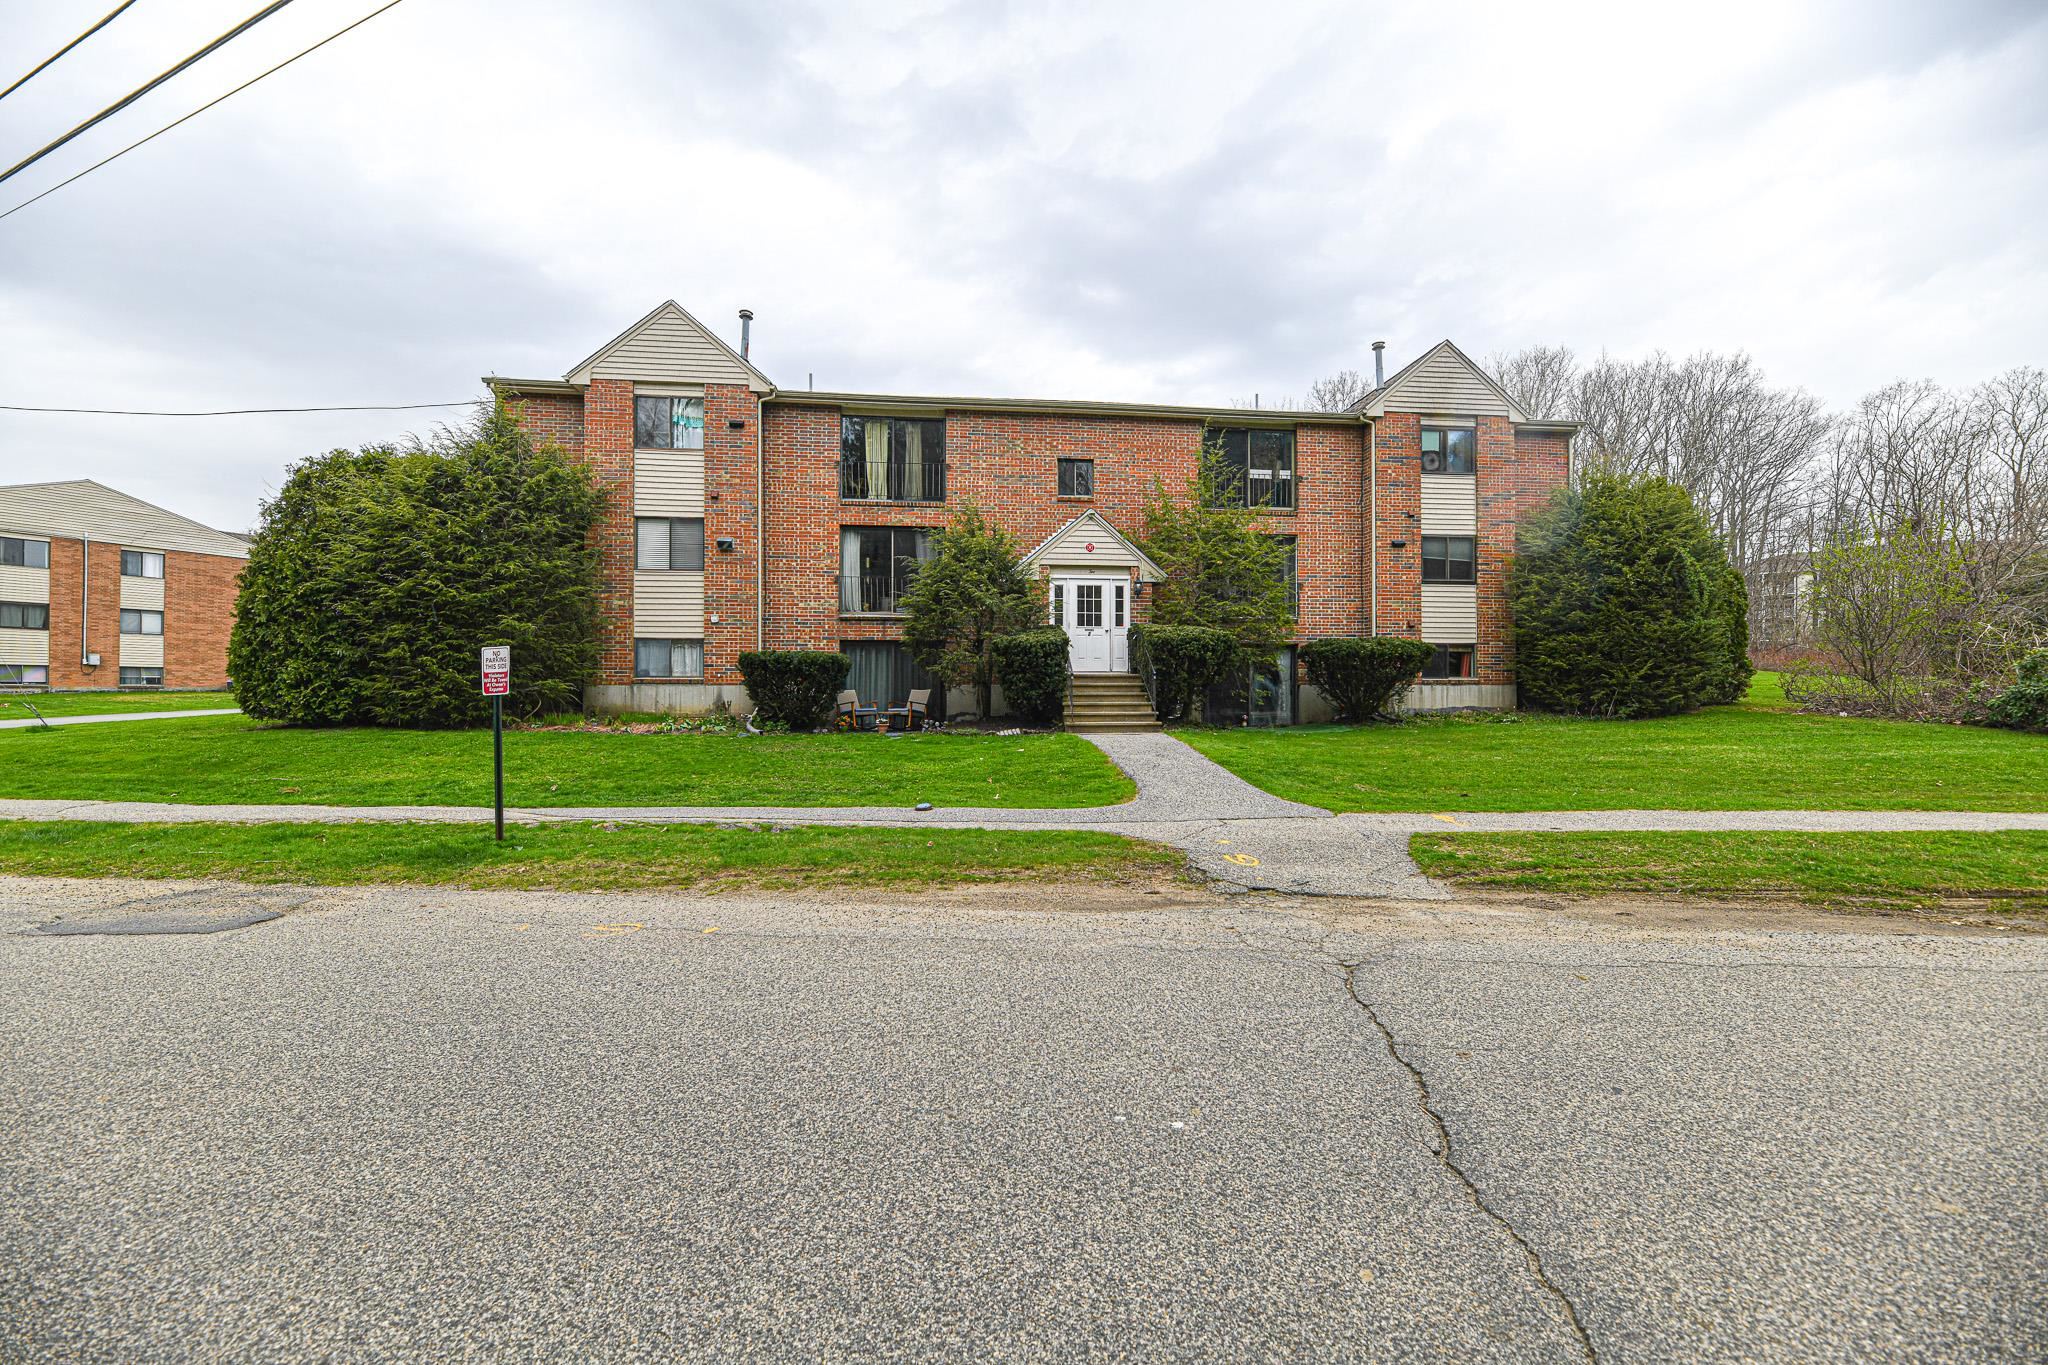 MLS 4992818: 2 Brookside Drive-Unit 11, Exeter NH